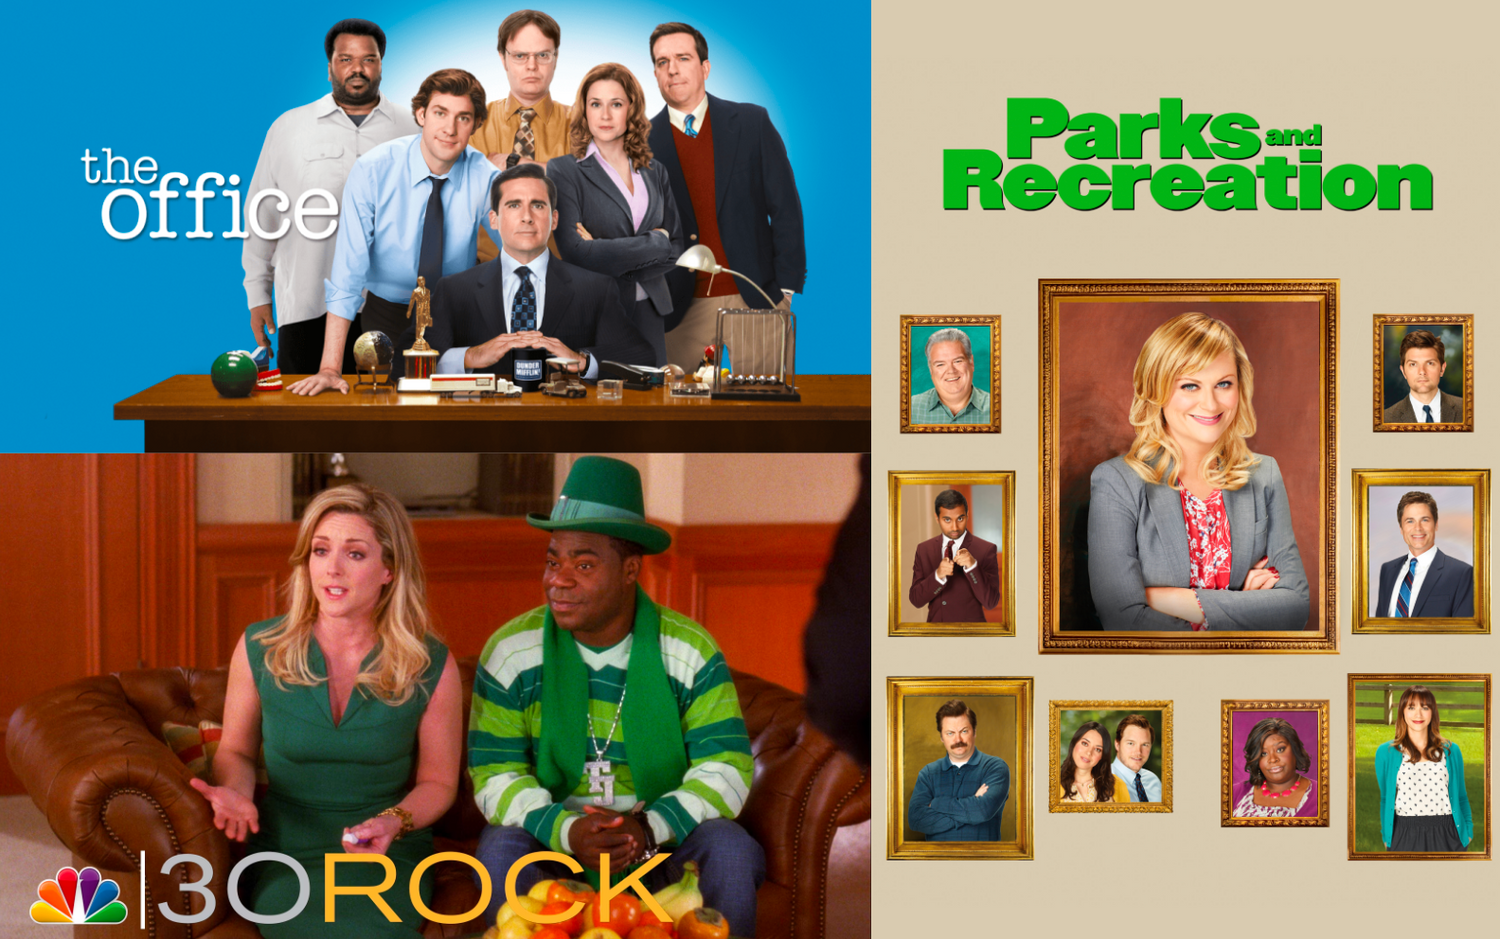 Best of NBC Comedy Top Shows